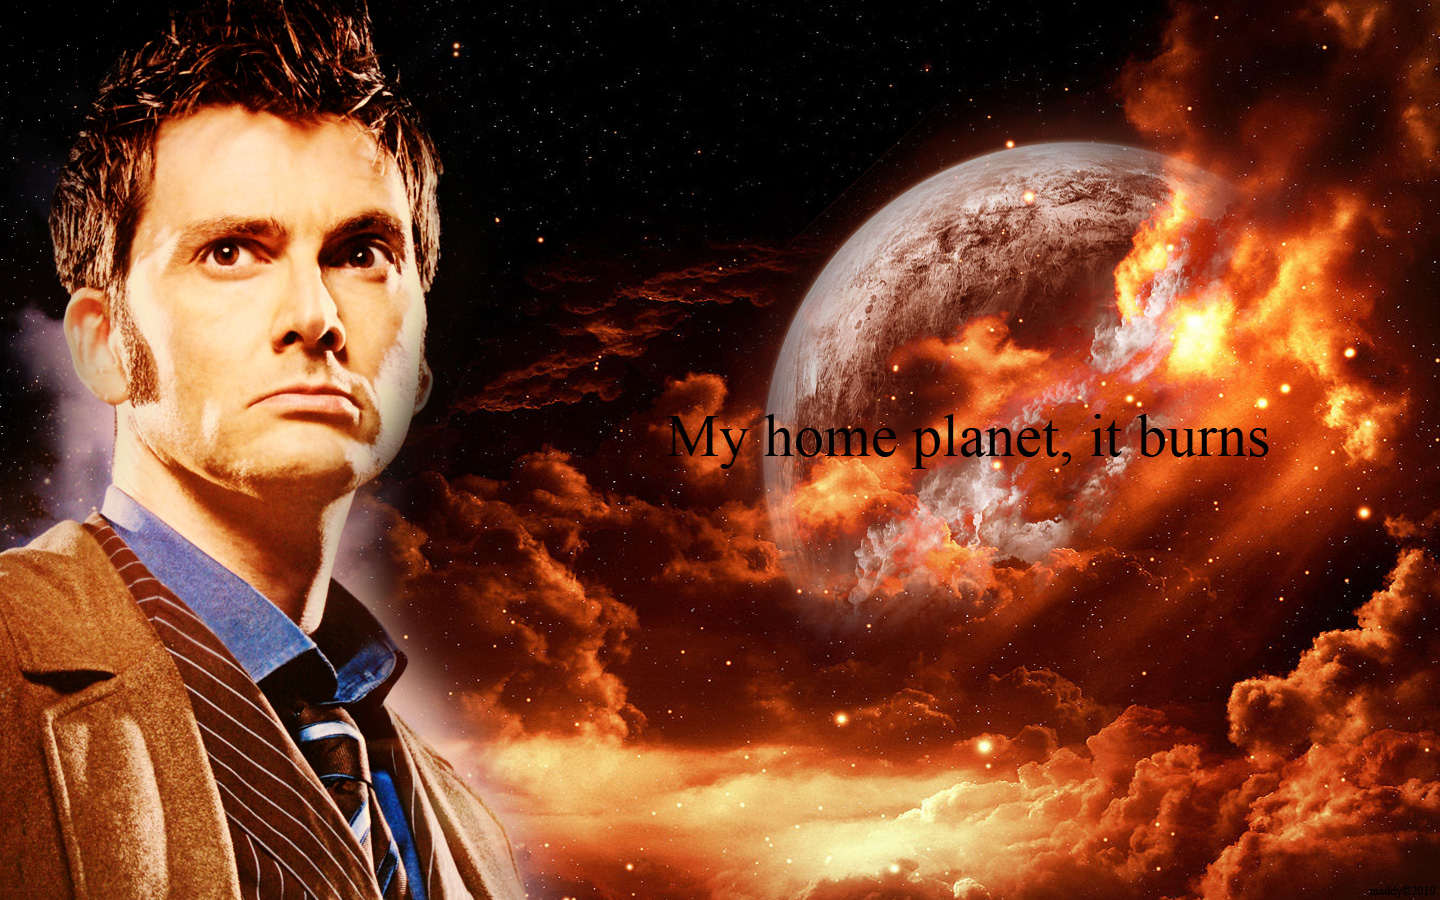 The tenth doctor